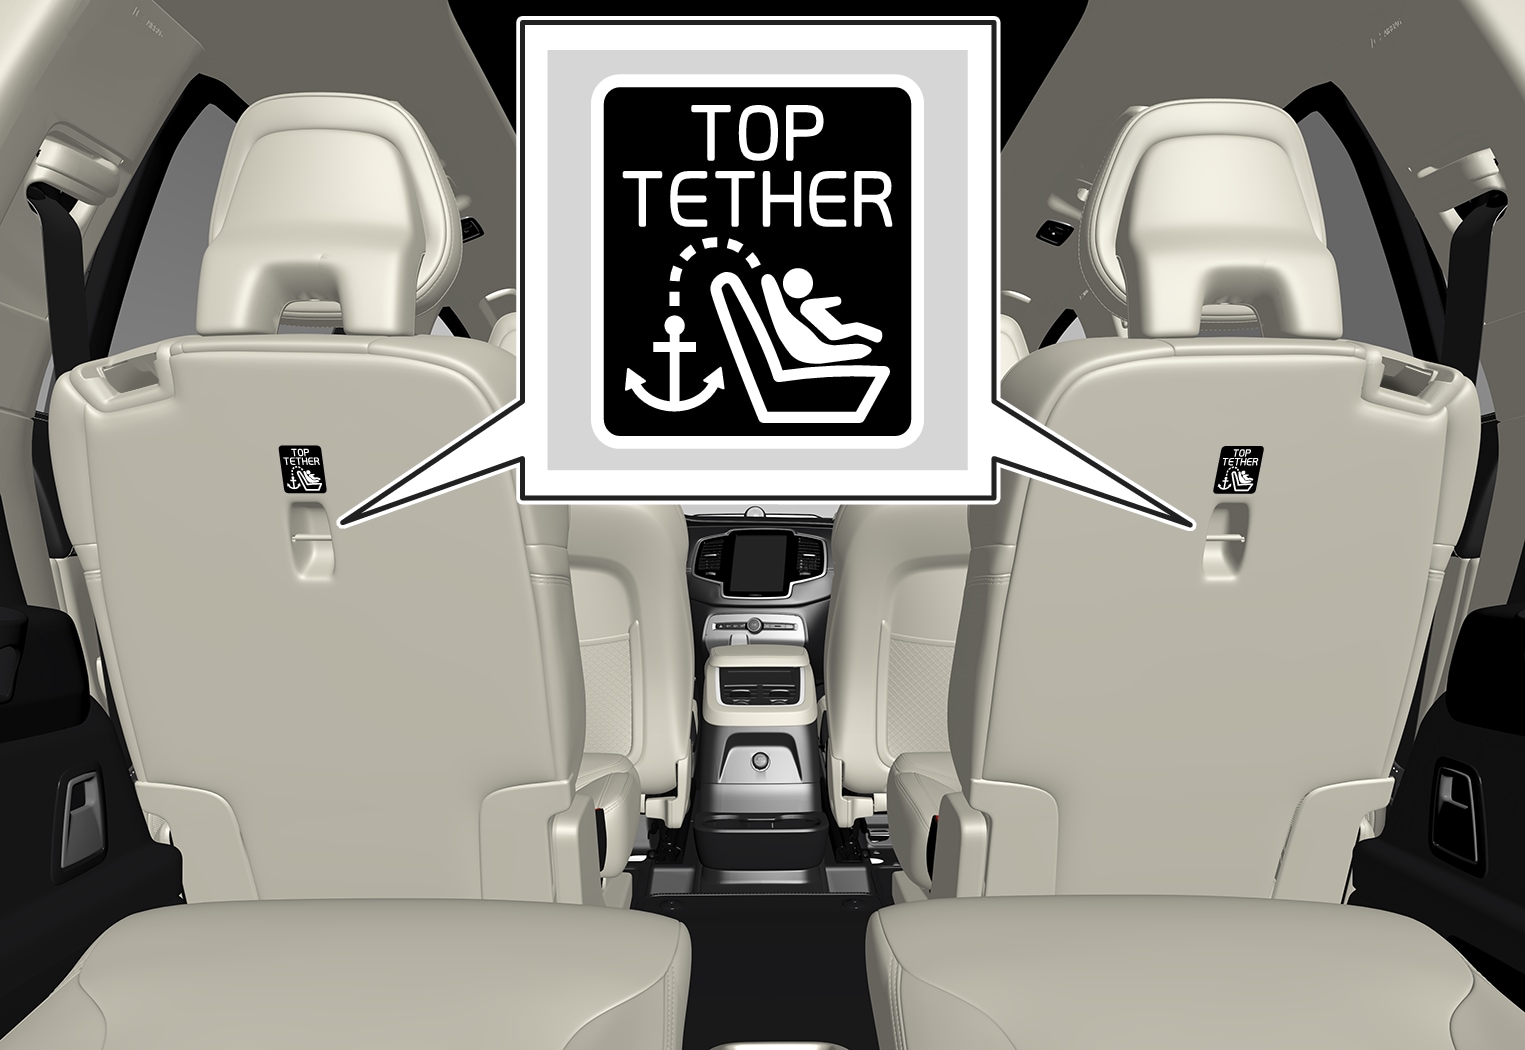 P5-1917-XC90 6-seat–Safety–Top tether anchors 2nd row